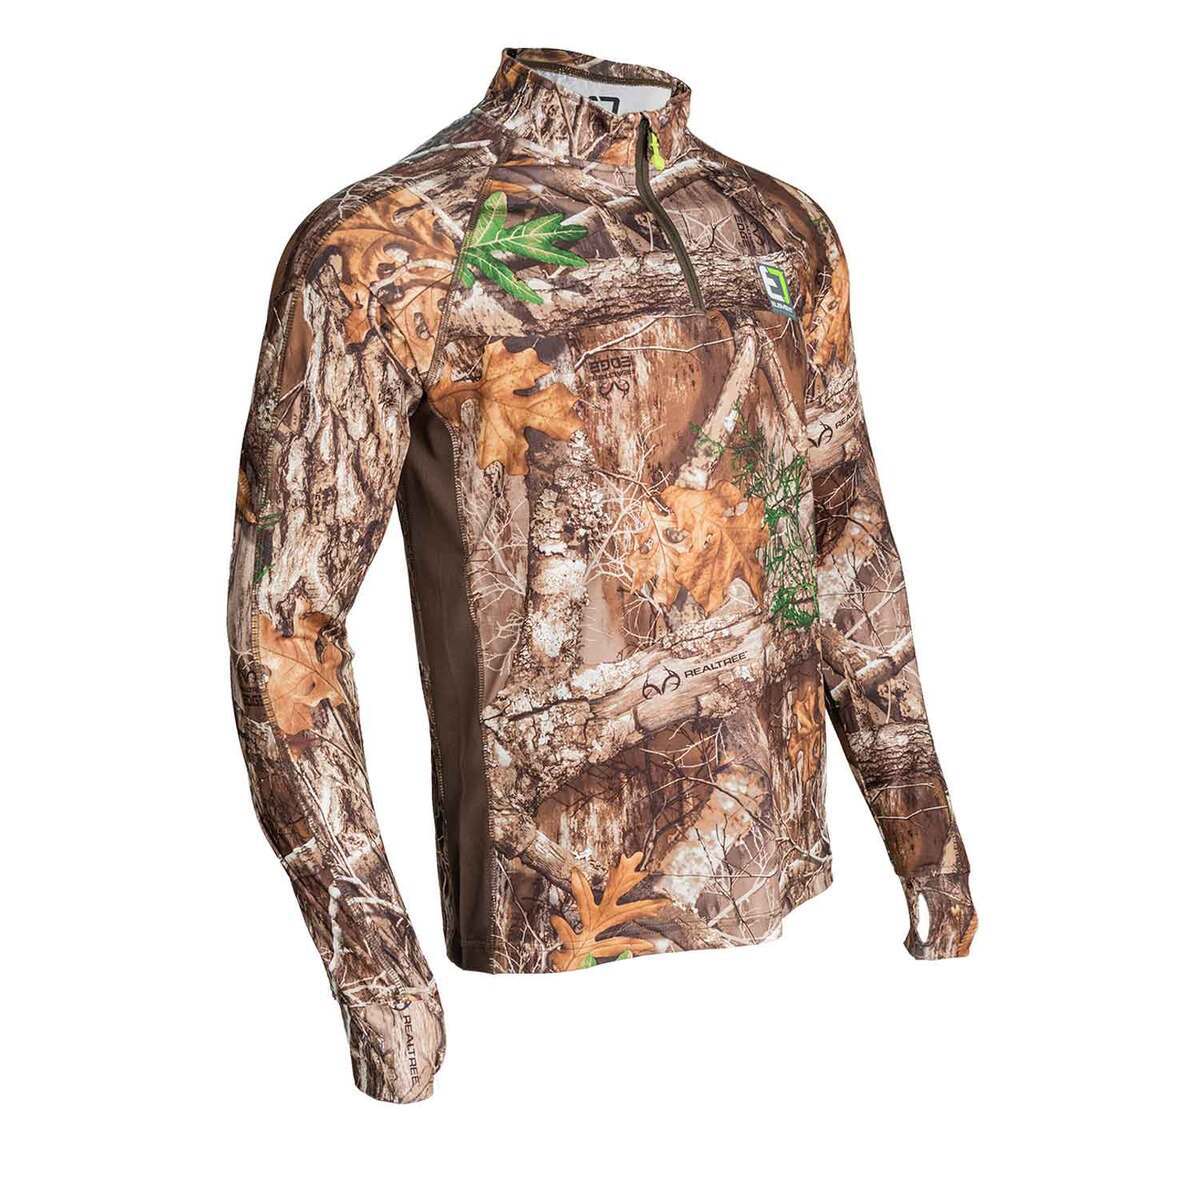 Realtree Zipper Athletic Long Sleeve Shirts for Men